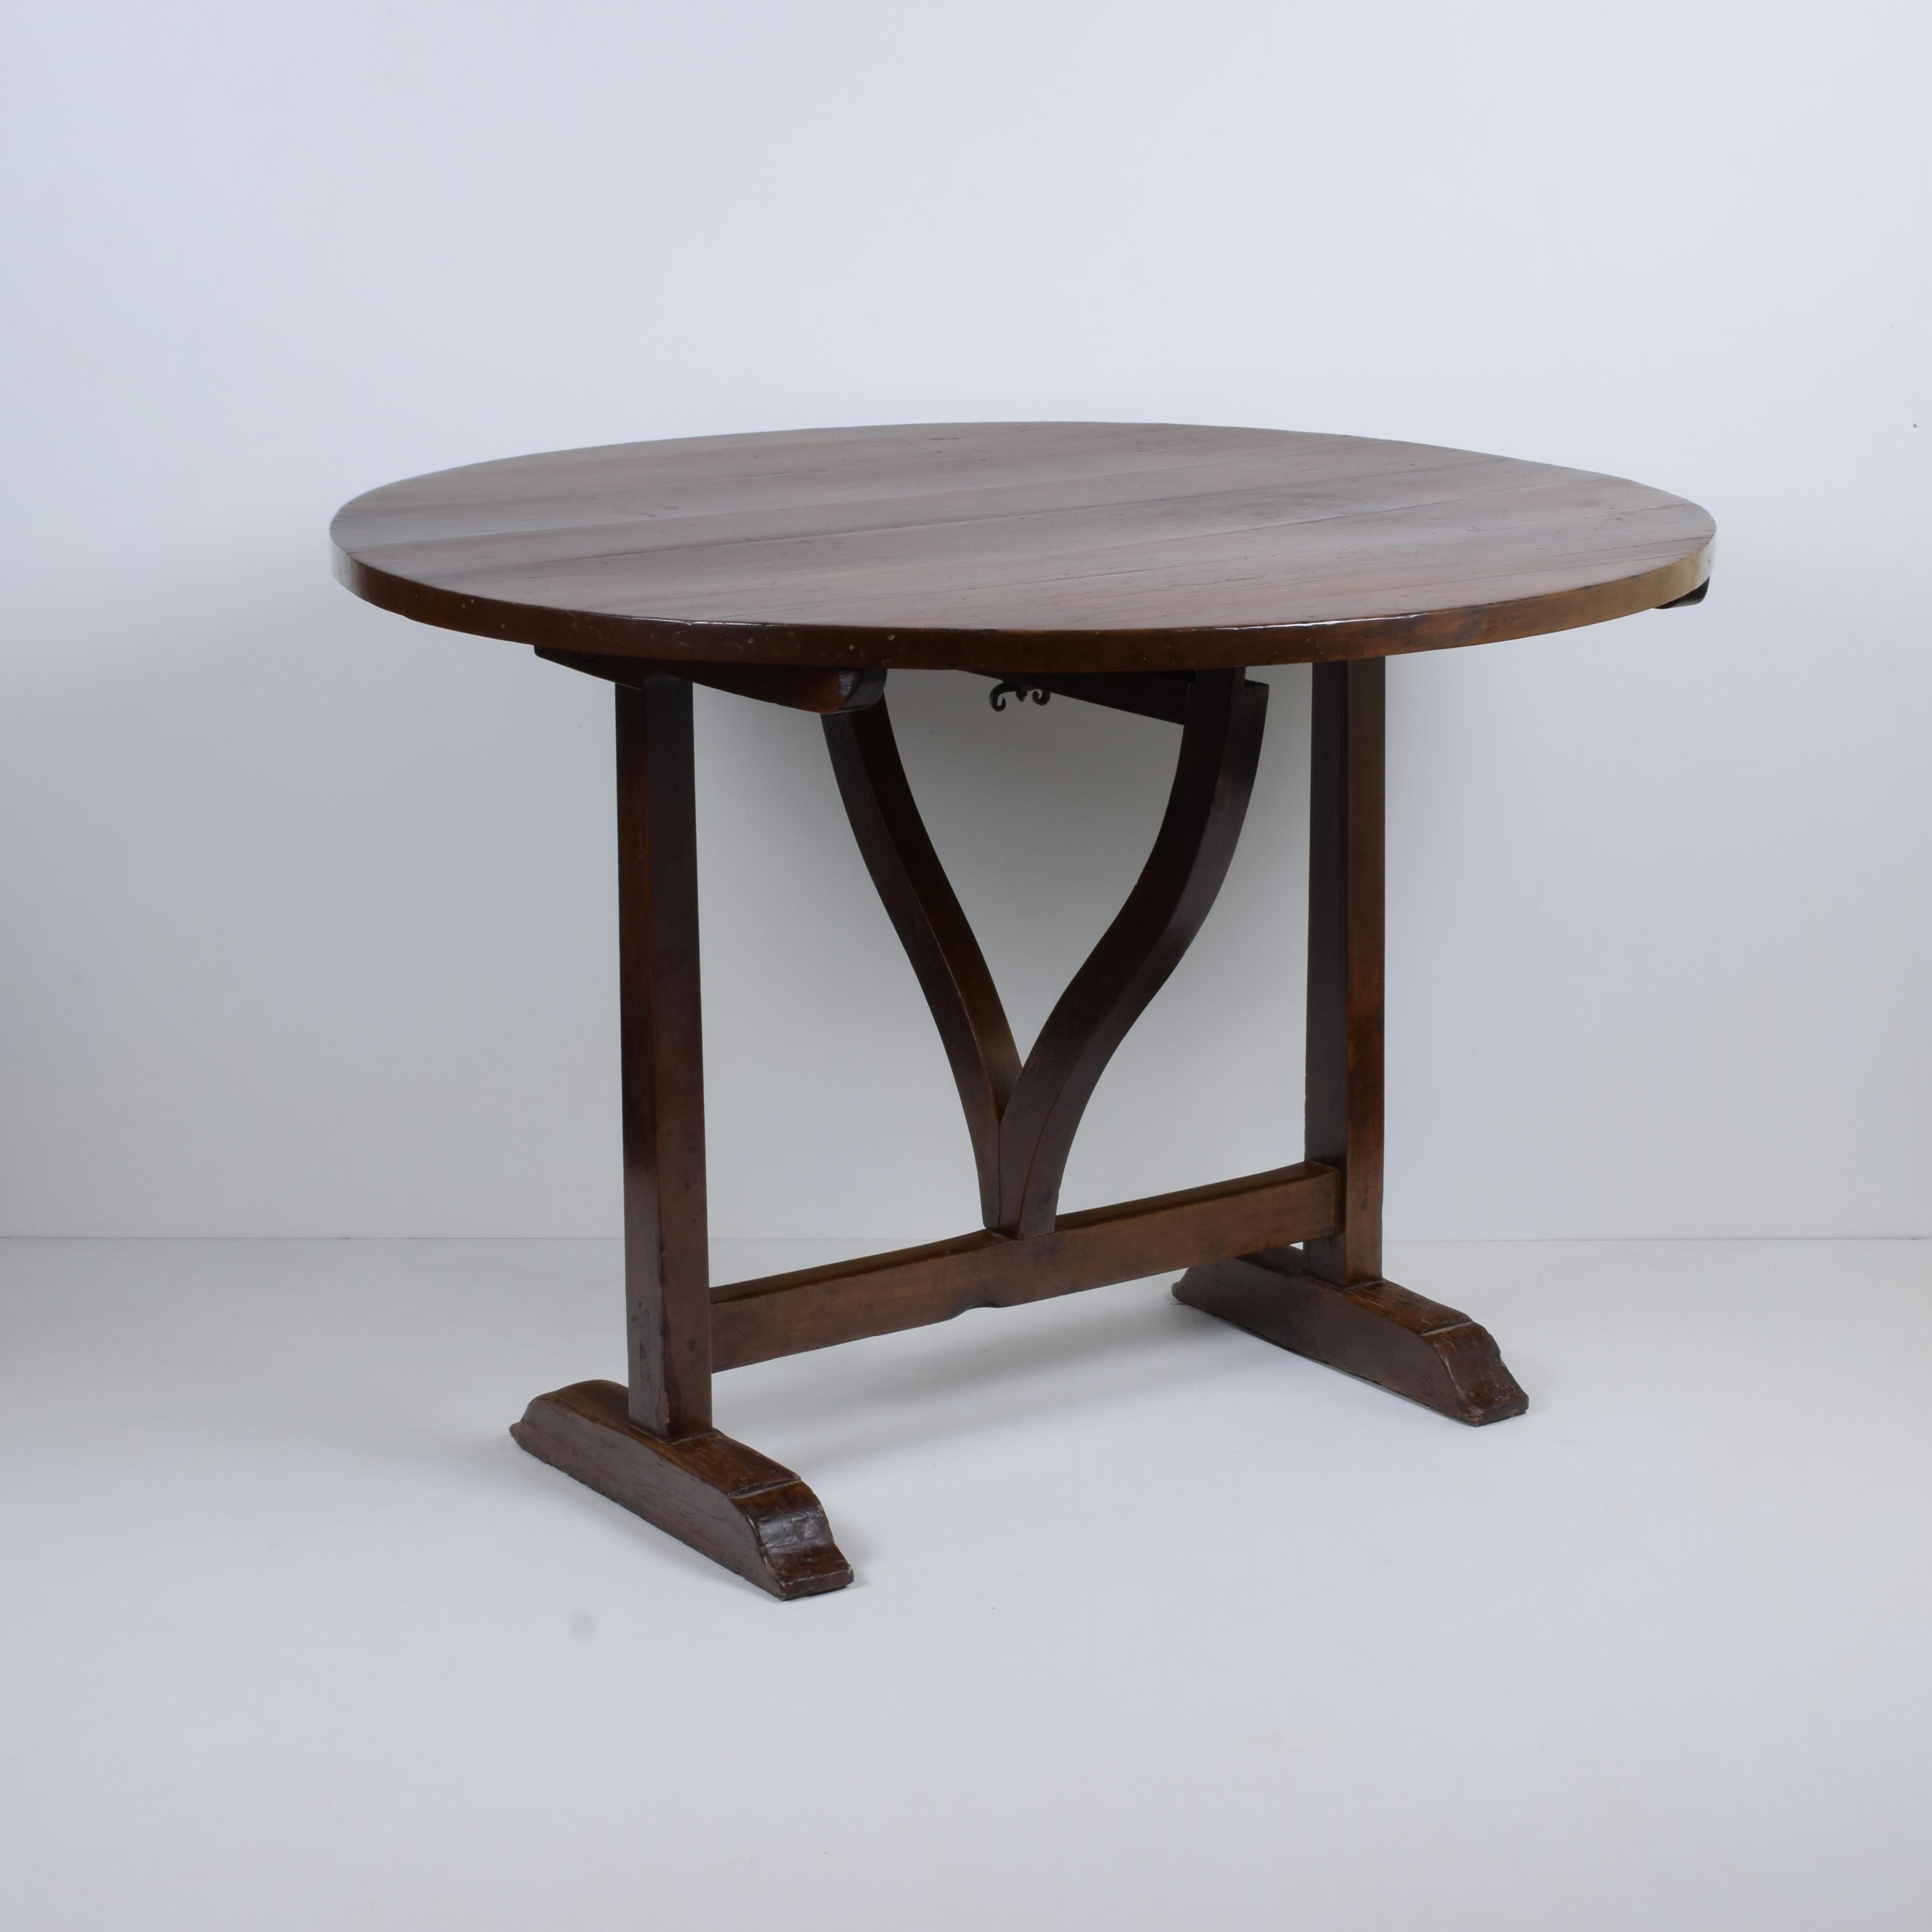 In solid cherry
Wine tasting tilt-top cherry table
Restored
Dimensions: Diameter cm 98 Height cm approximate 69.5.